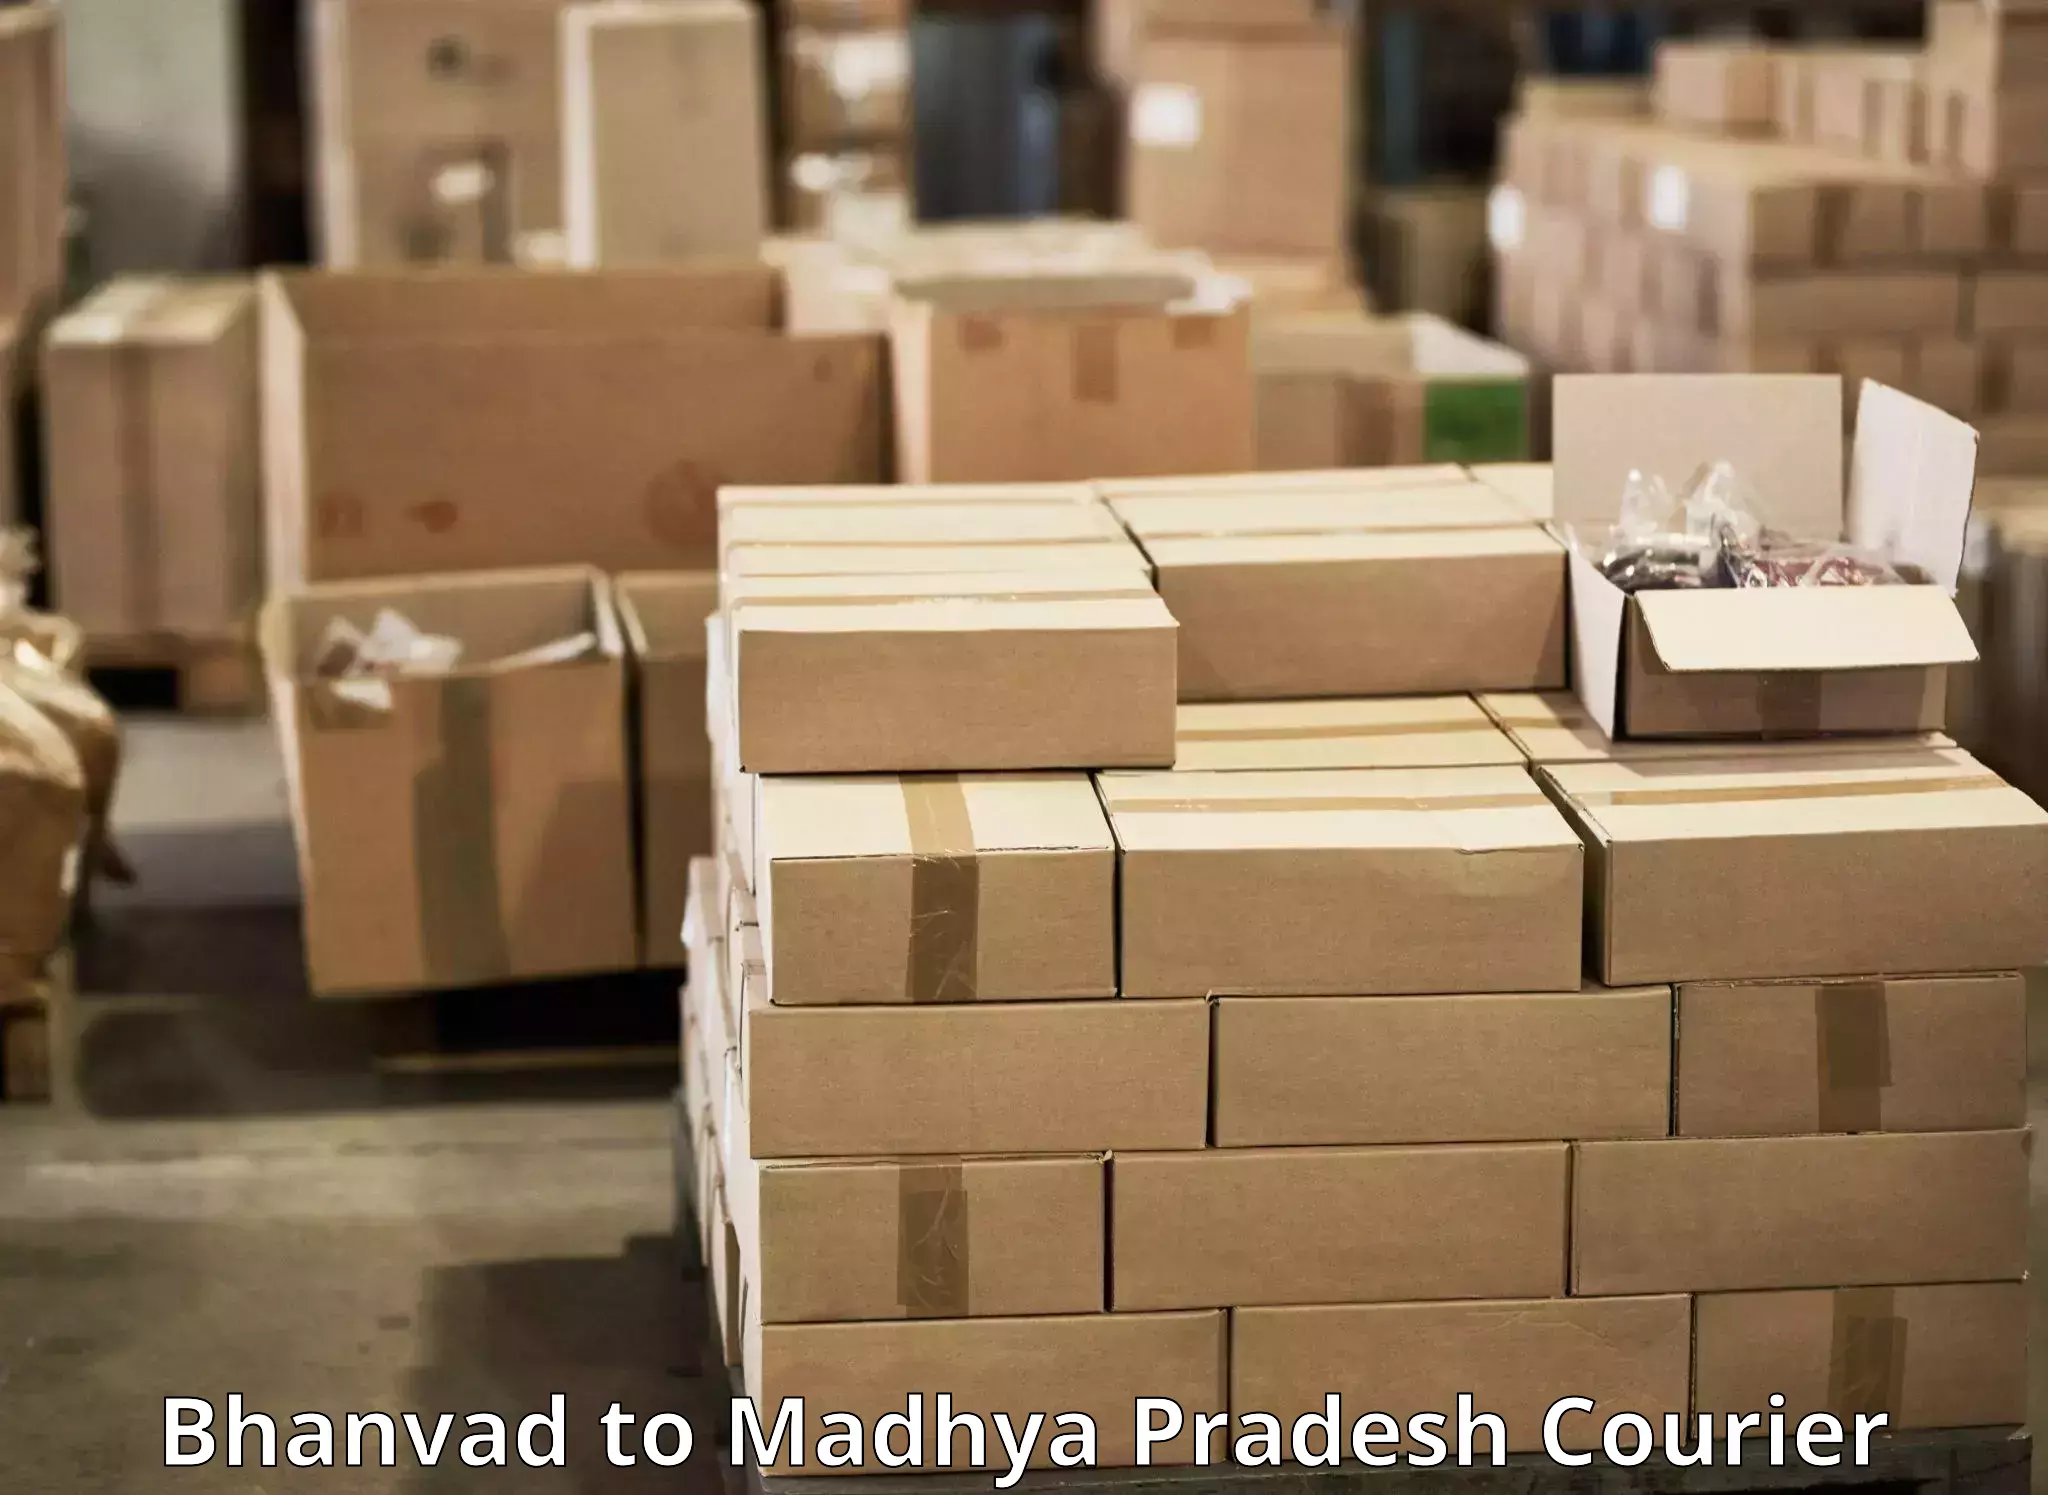 Round-the-clock parcel delivery in Bhanvad to Khargone